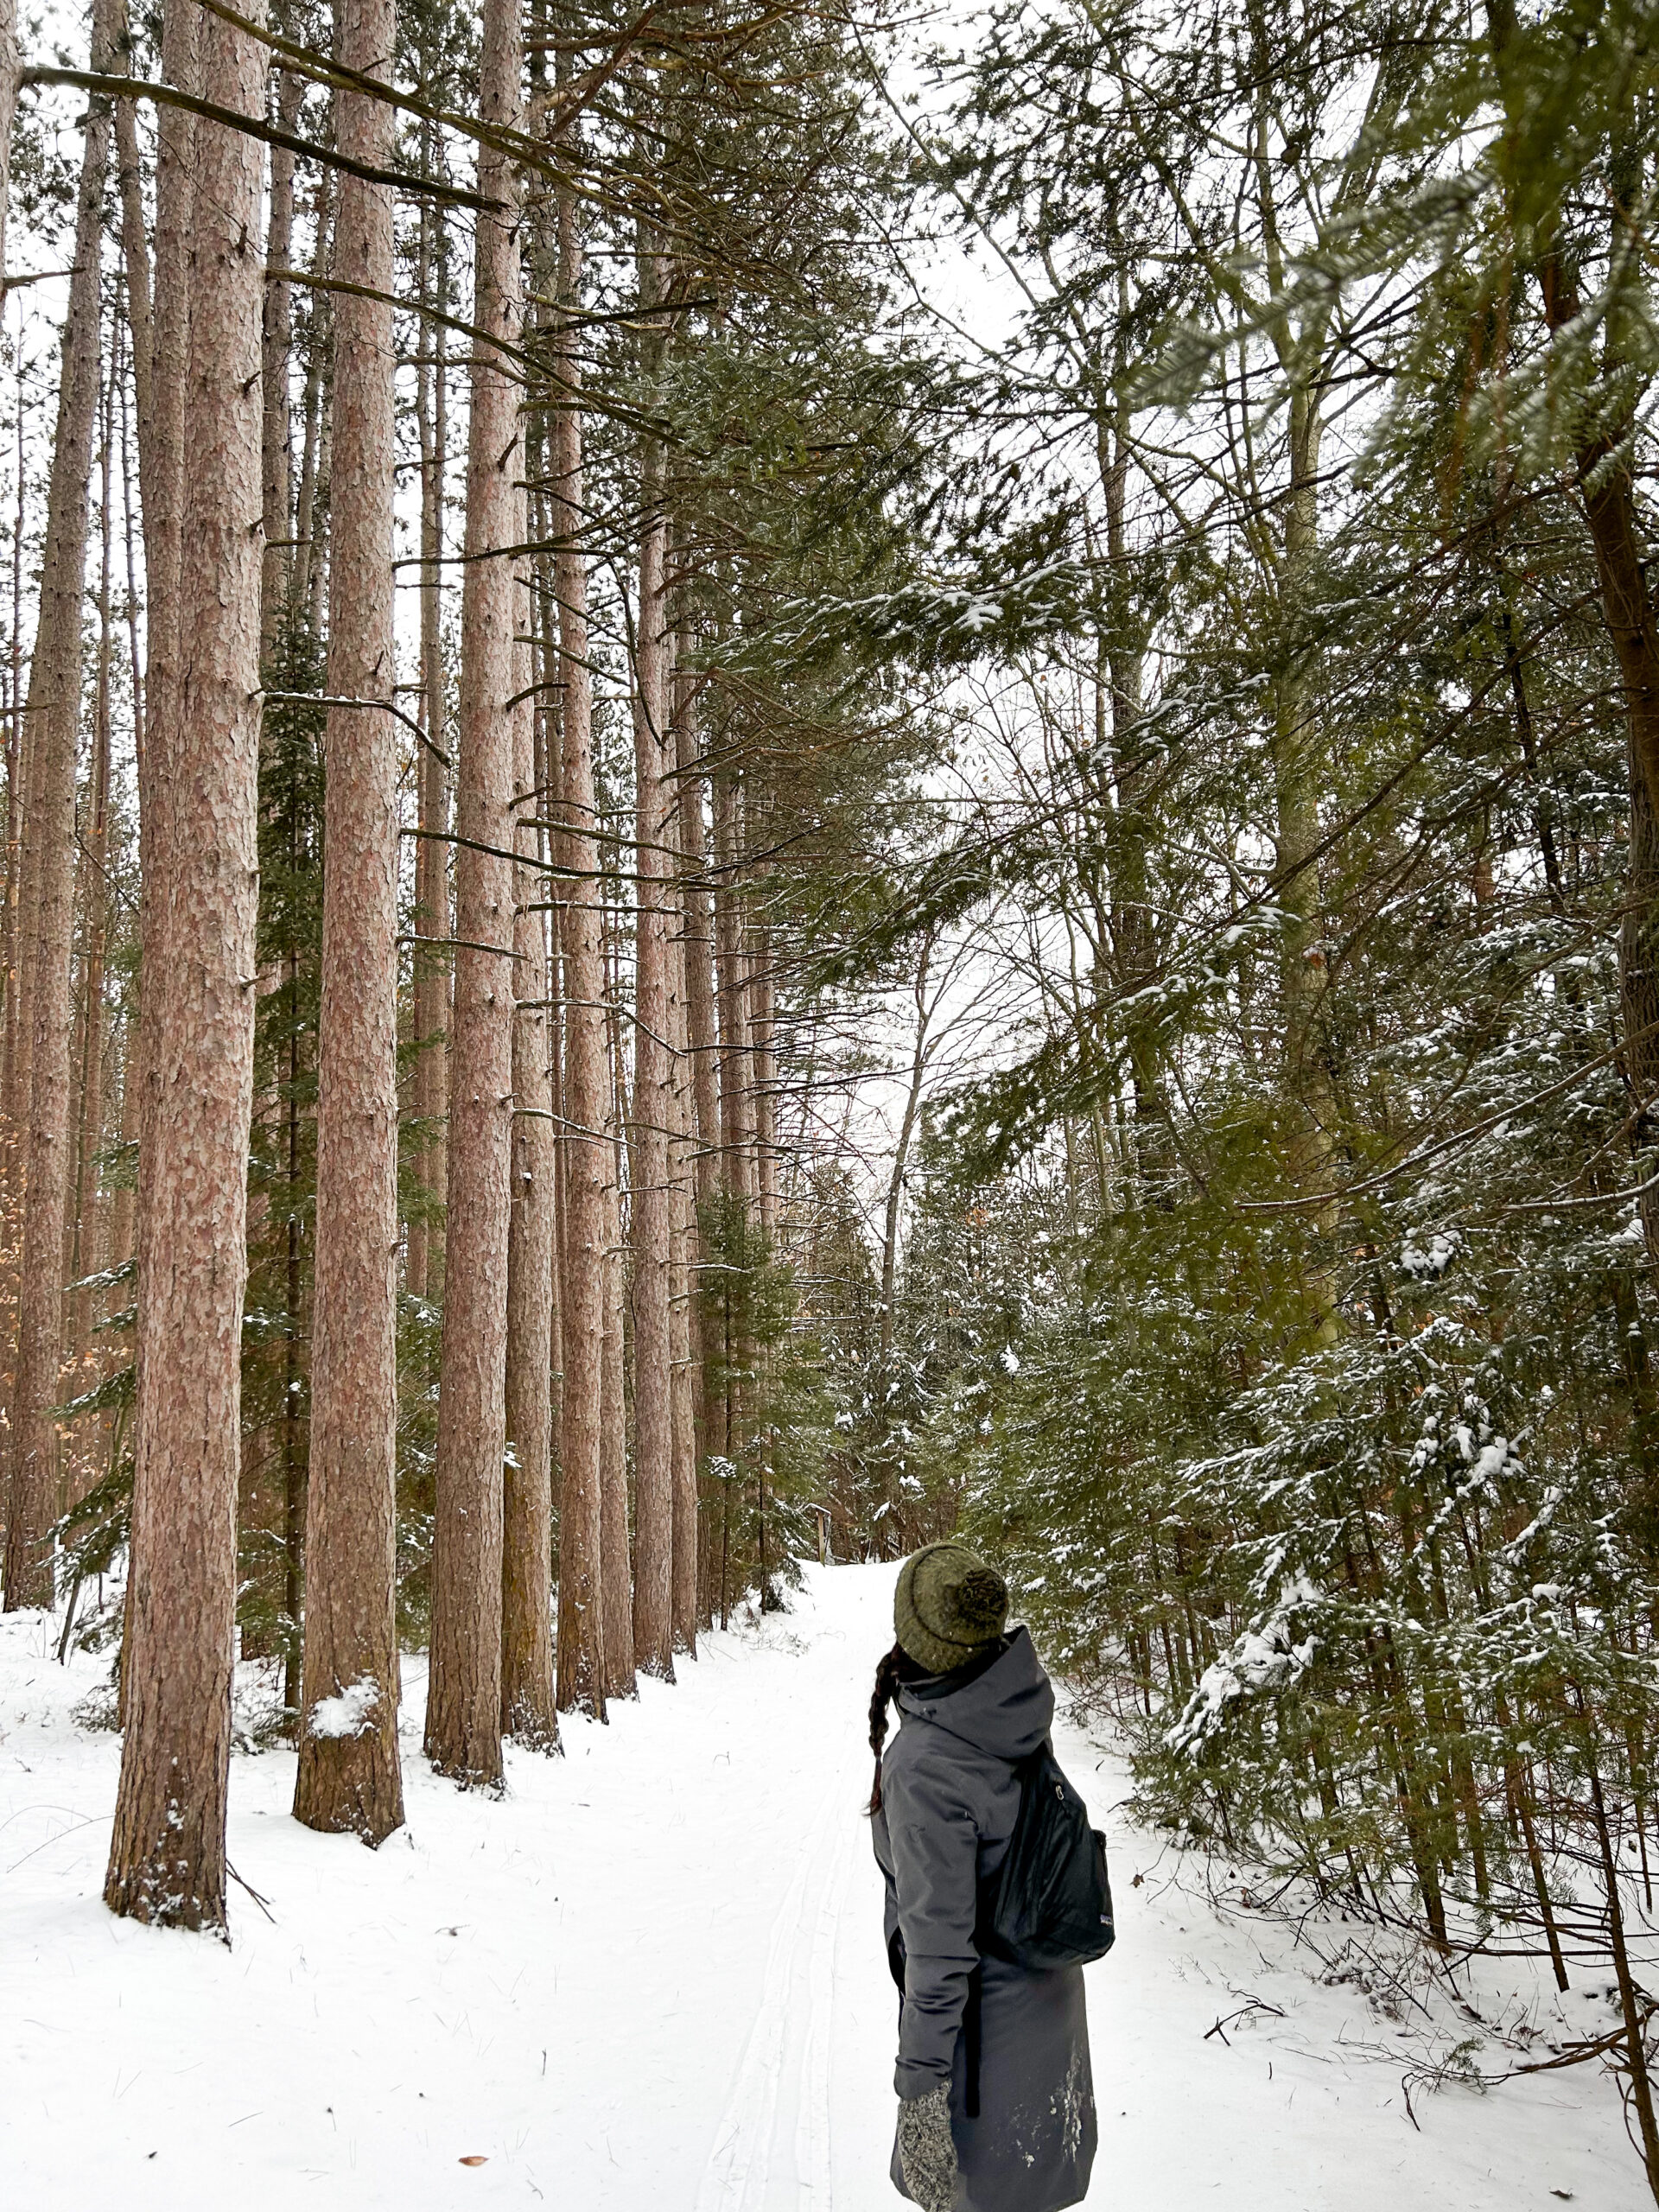 Hiking Trails Close to Detroit: the great outdoors within 1 hour